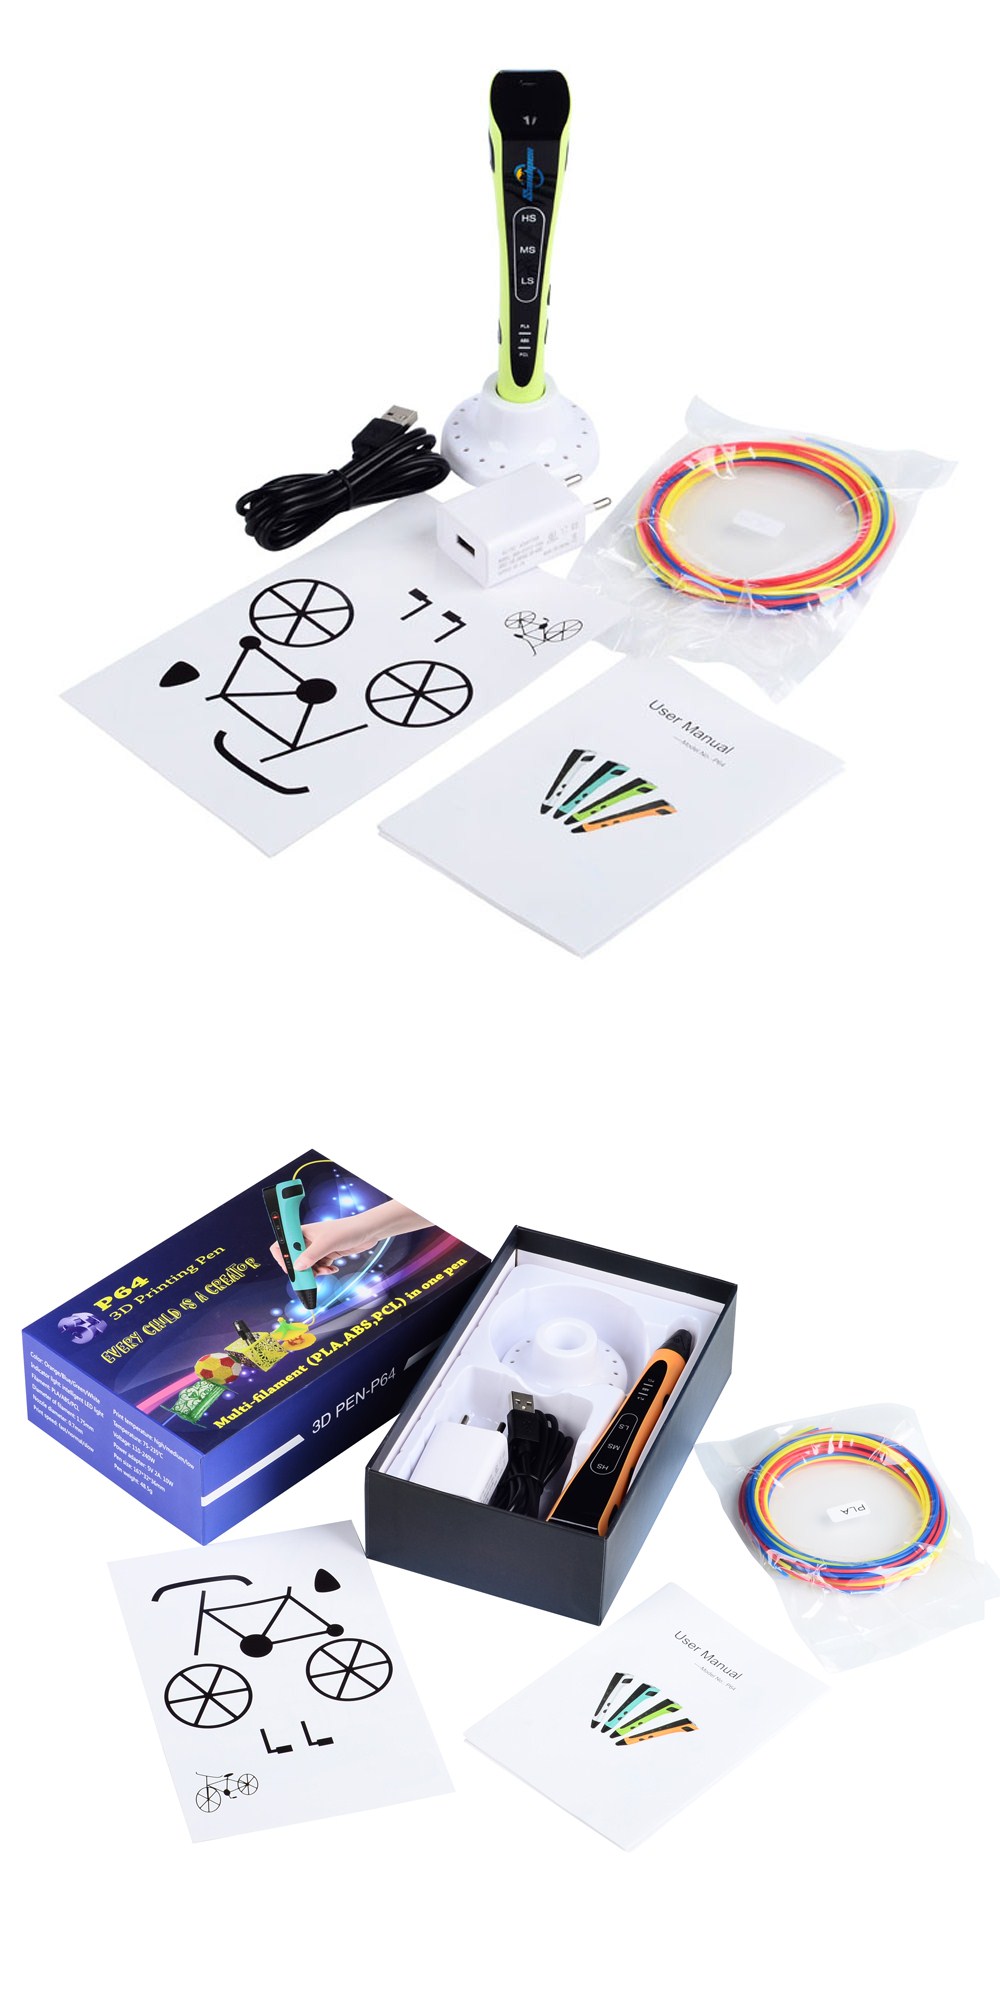 Orange/Blue/Green/White110-240V 3D Printing Pen for ABS/PLA/PCL Filament Support Adjustable Speed 28